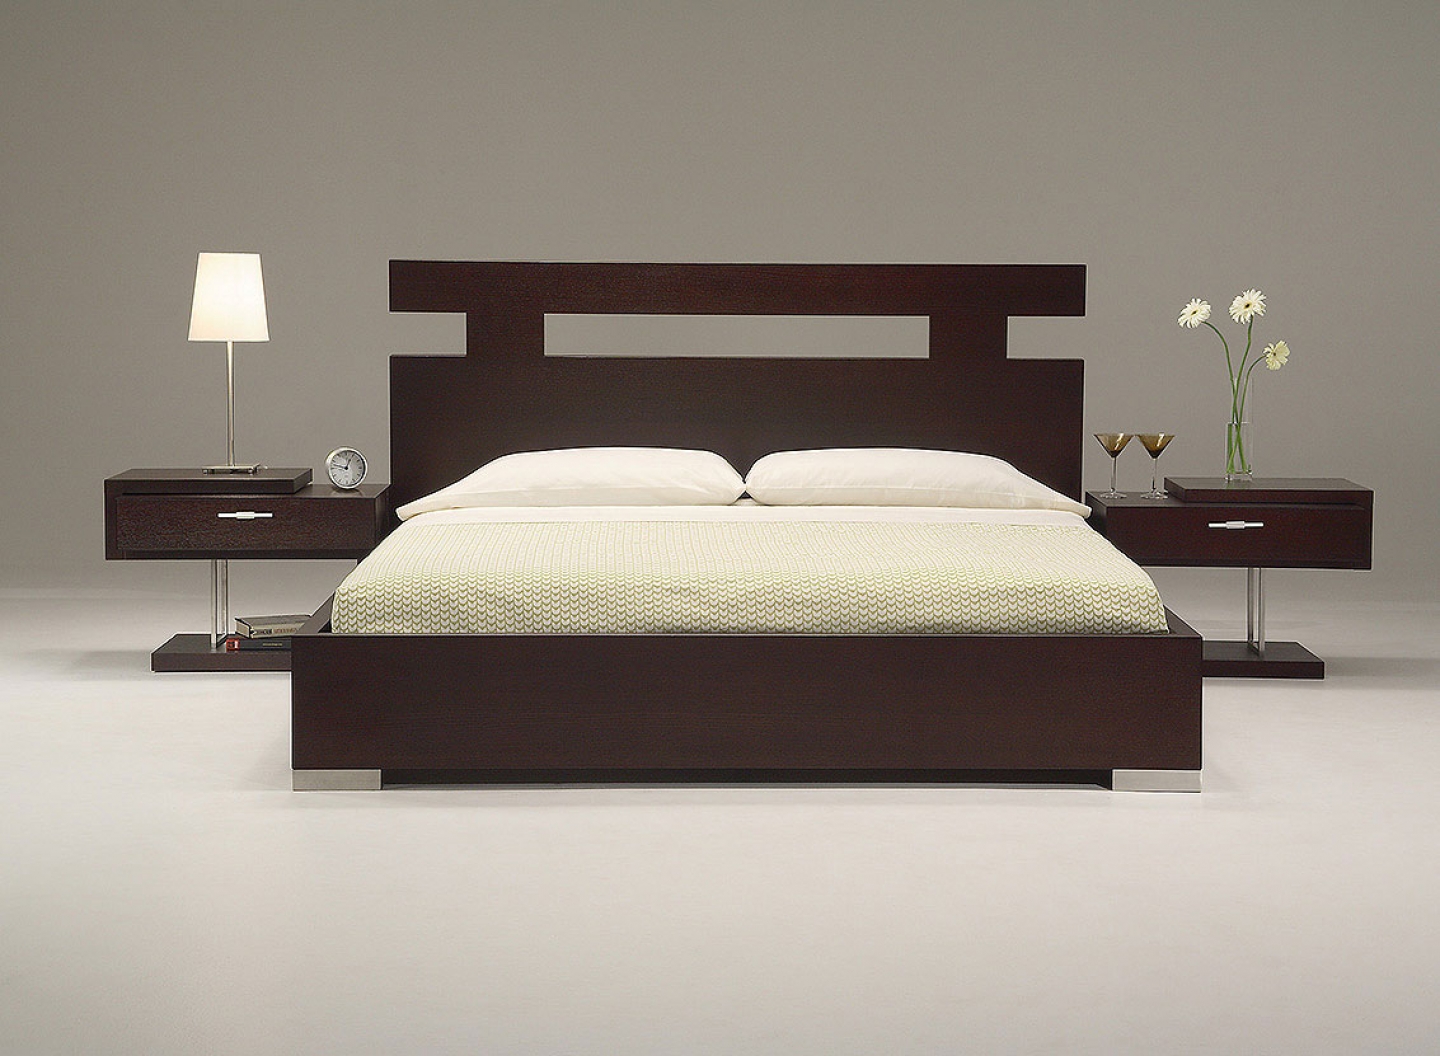 Awesome-bed-designs-LH3